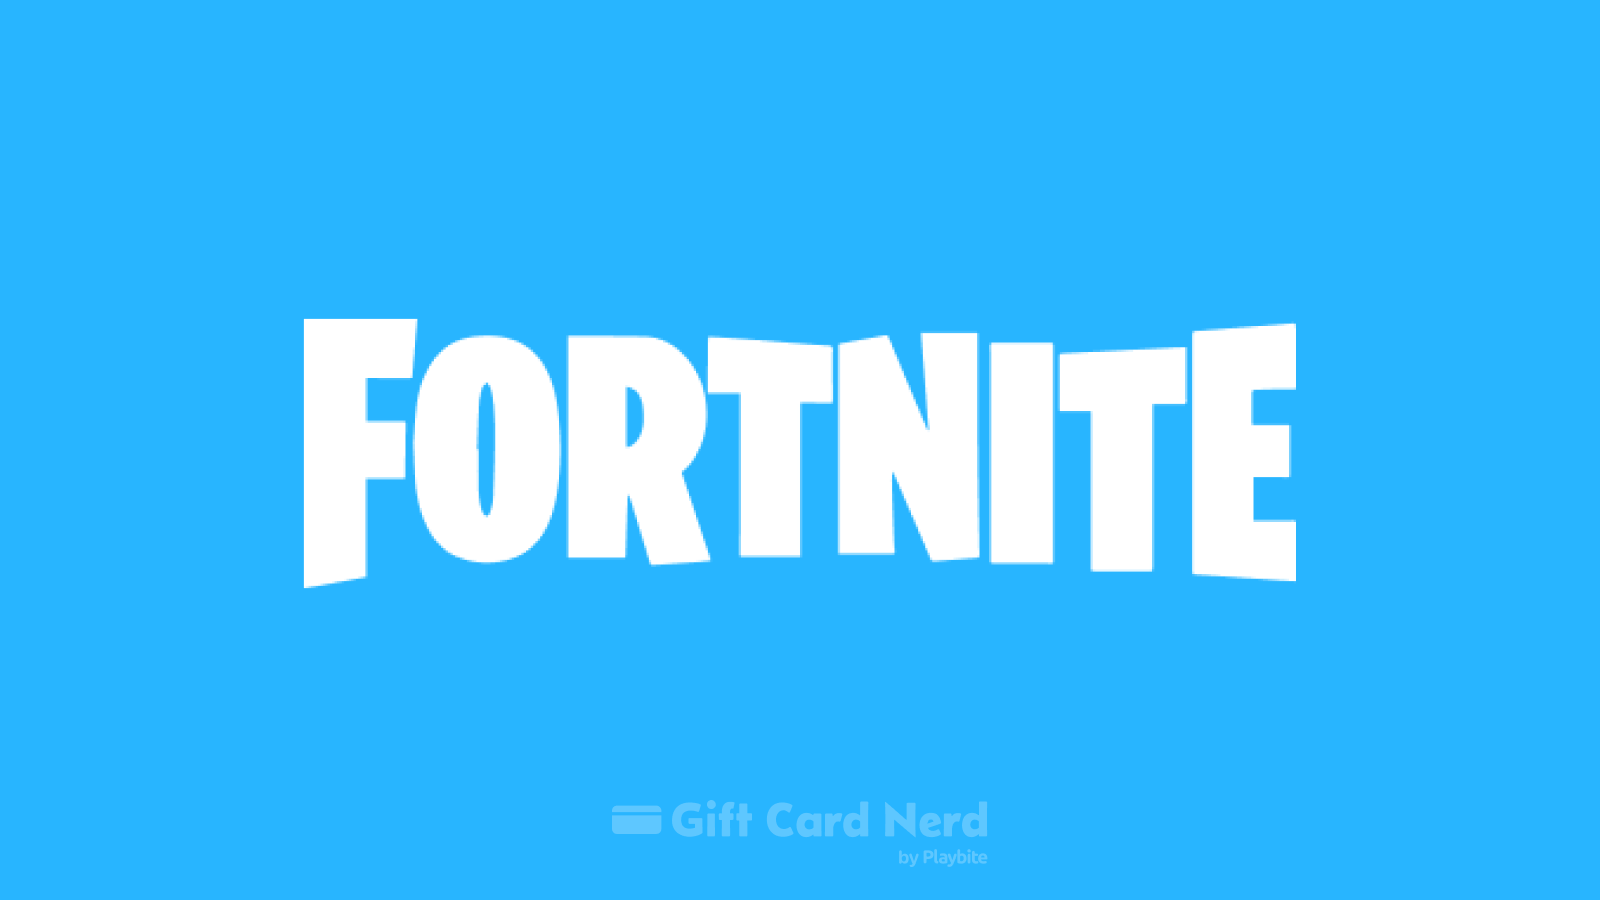 Can I Use a Fortnite Gift Card on DoorDash?